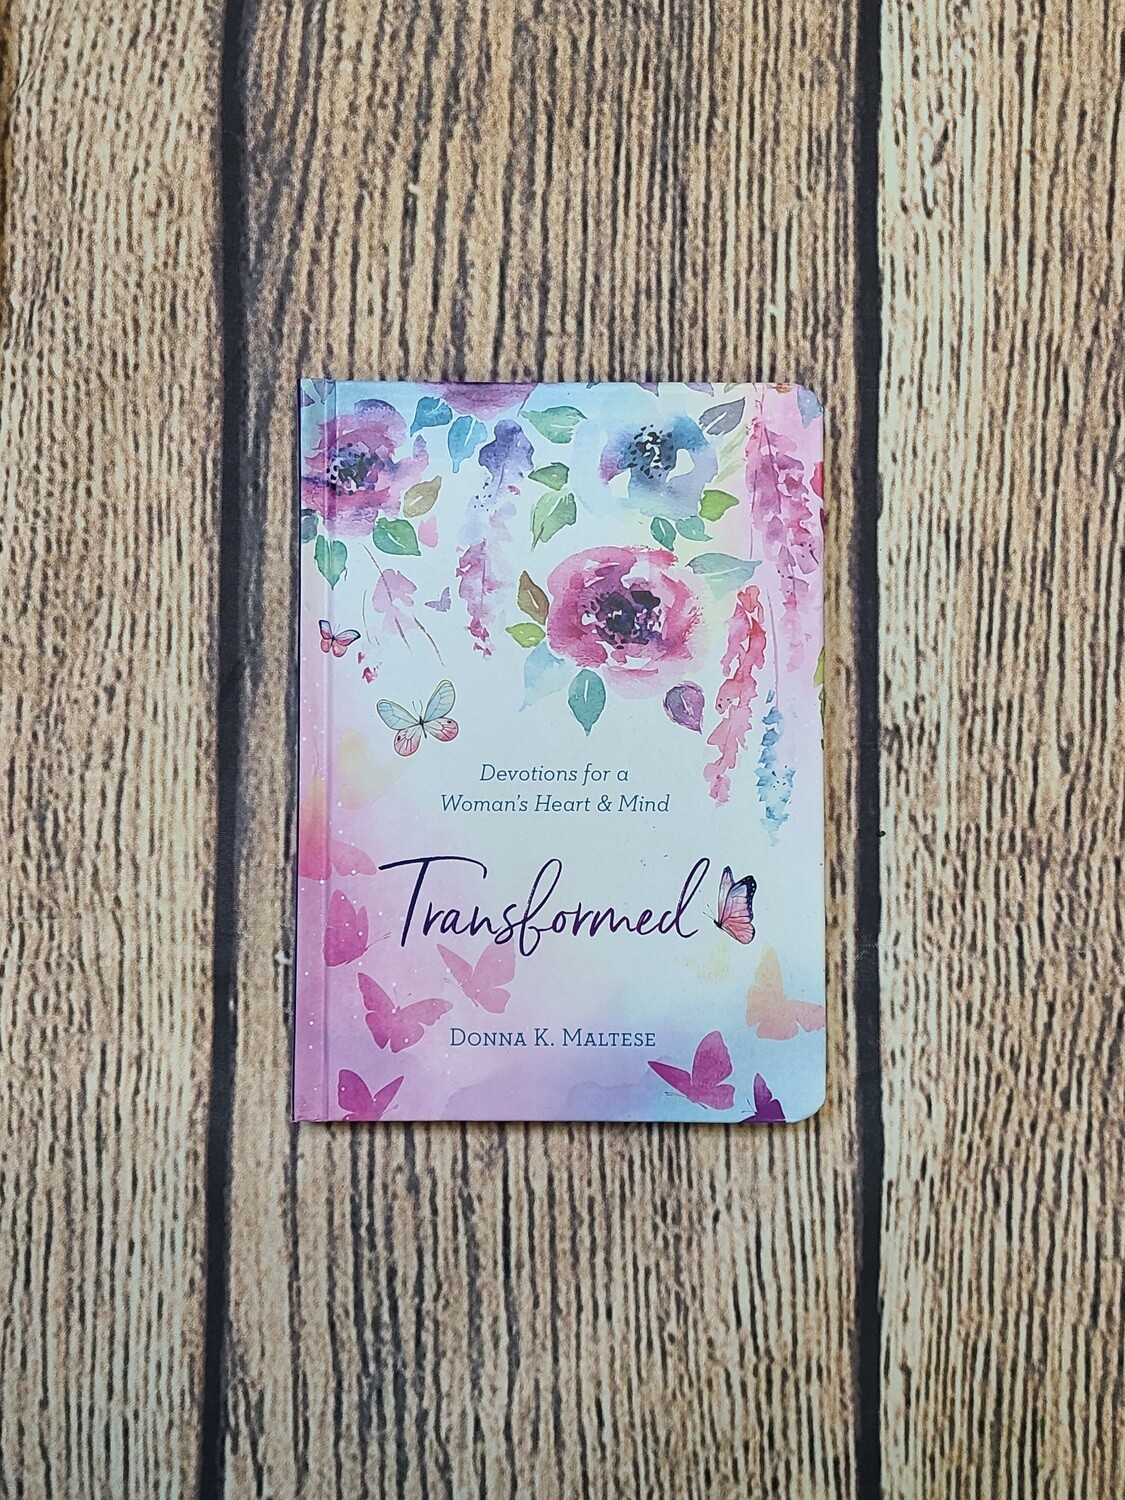 Transformed: Devotions for a Woman's Heart and Mind by Donna K. Maltese